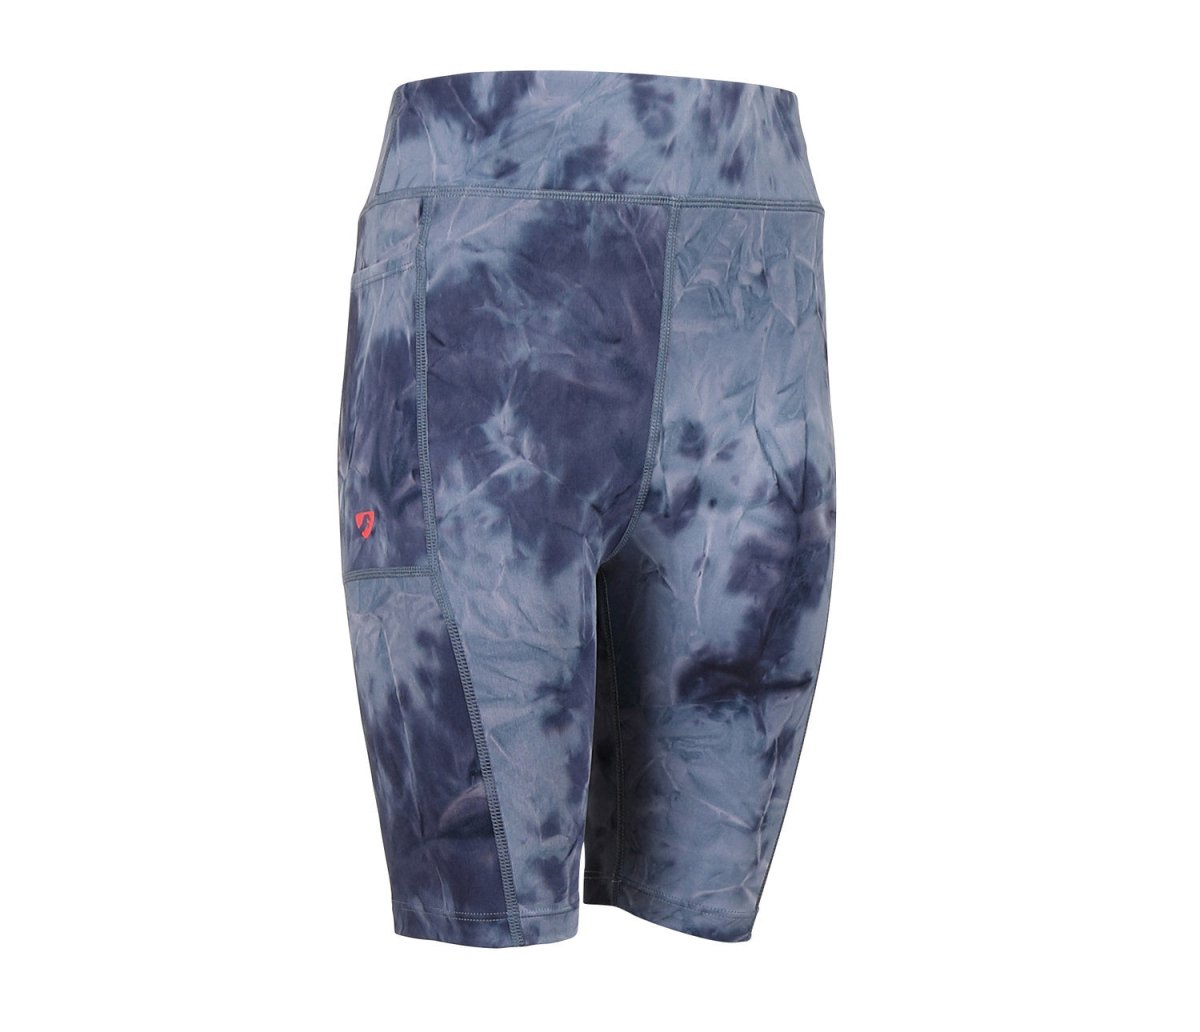 Aubrion SS24 Non Stop Shorts - Young Rider - Navy TyeDye - 11/12 Years